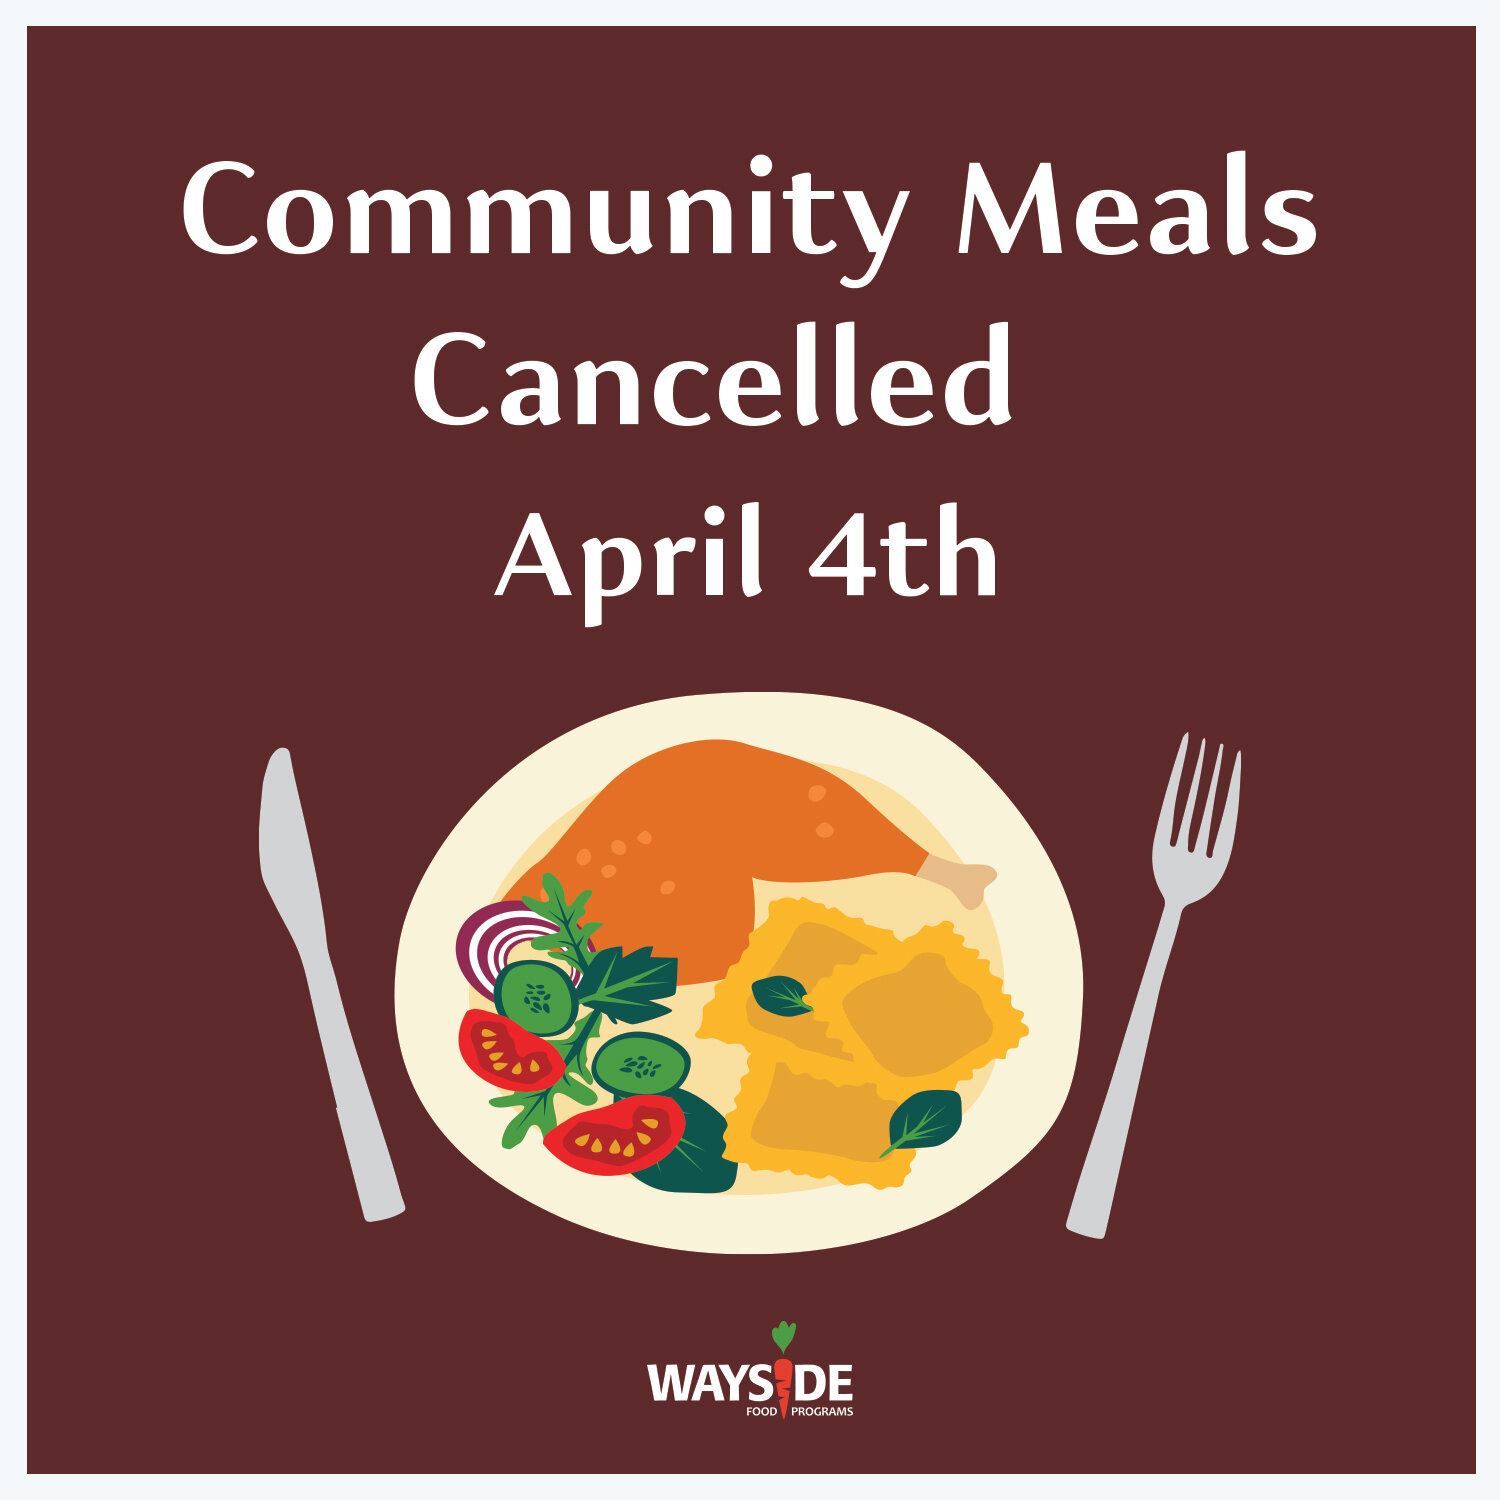 Due to the storm, all meals have been cancelled for Thursday, April 4th. Stay safe and warm!
.
.
#noreaster2024 #communitymeals #community